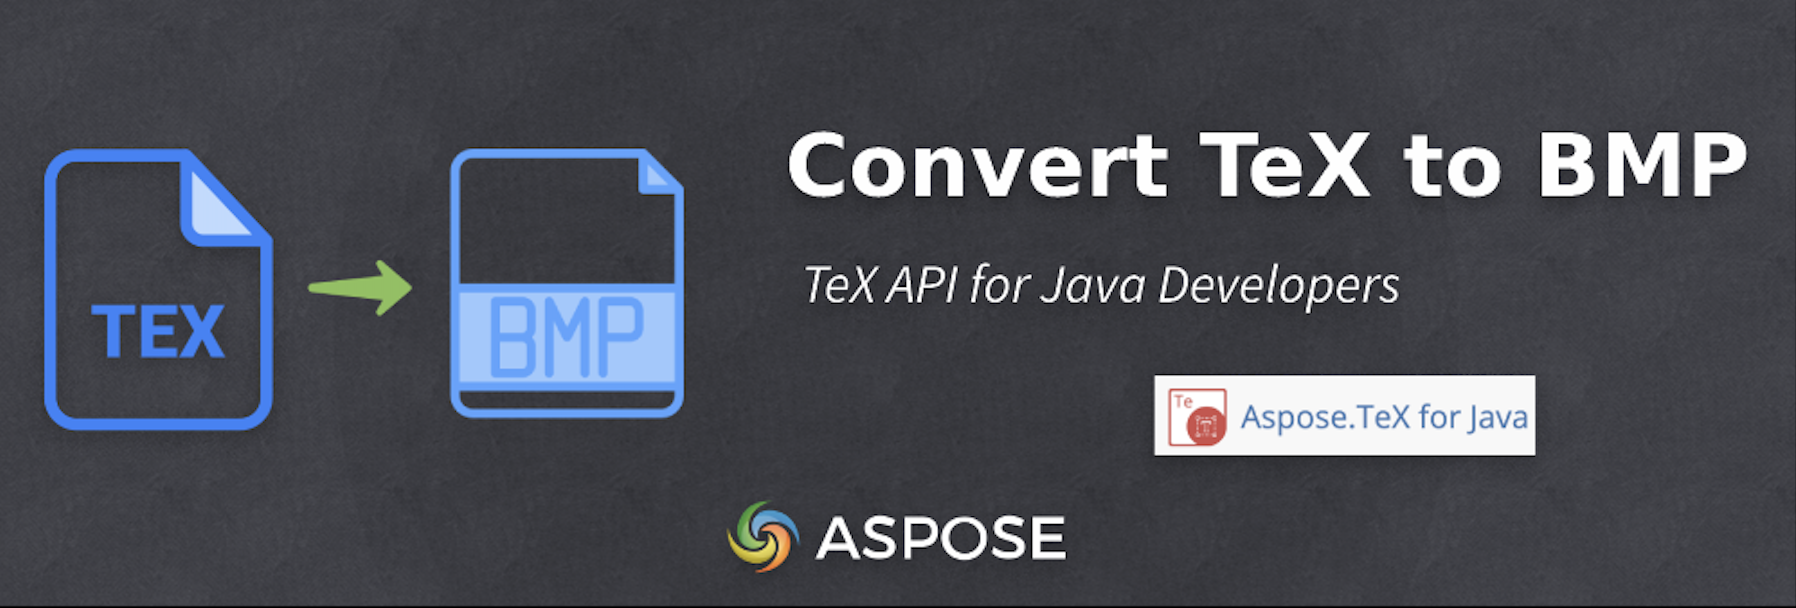 Convert TeX to BMP - TeX API for Java Developers